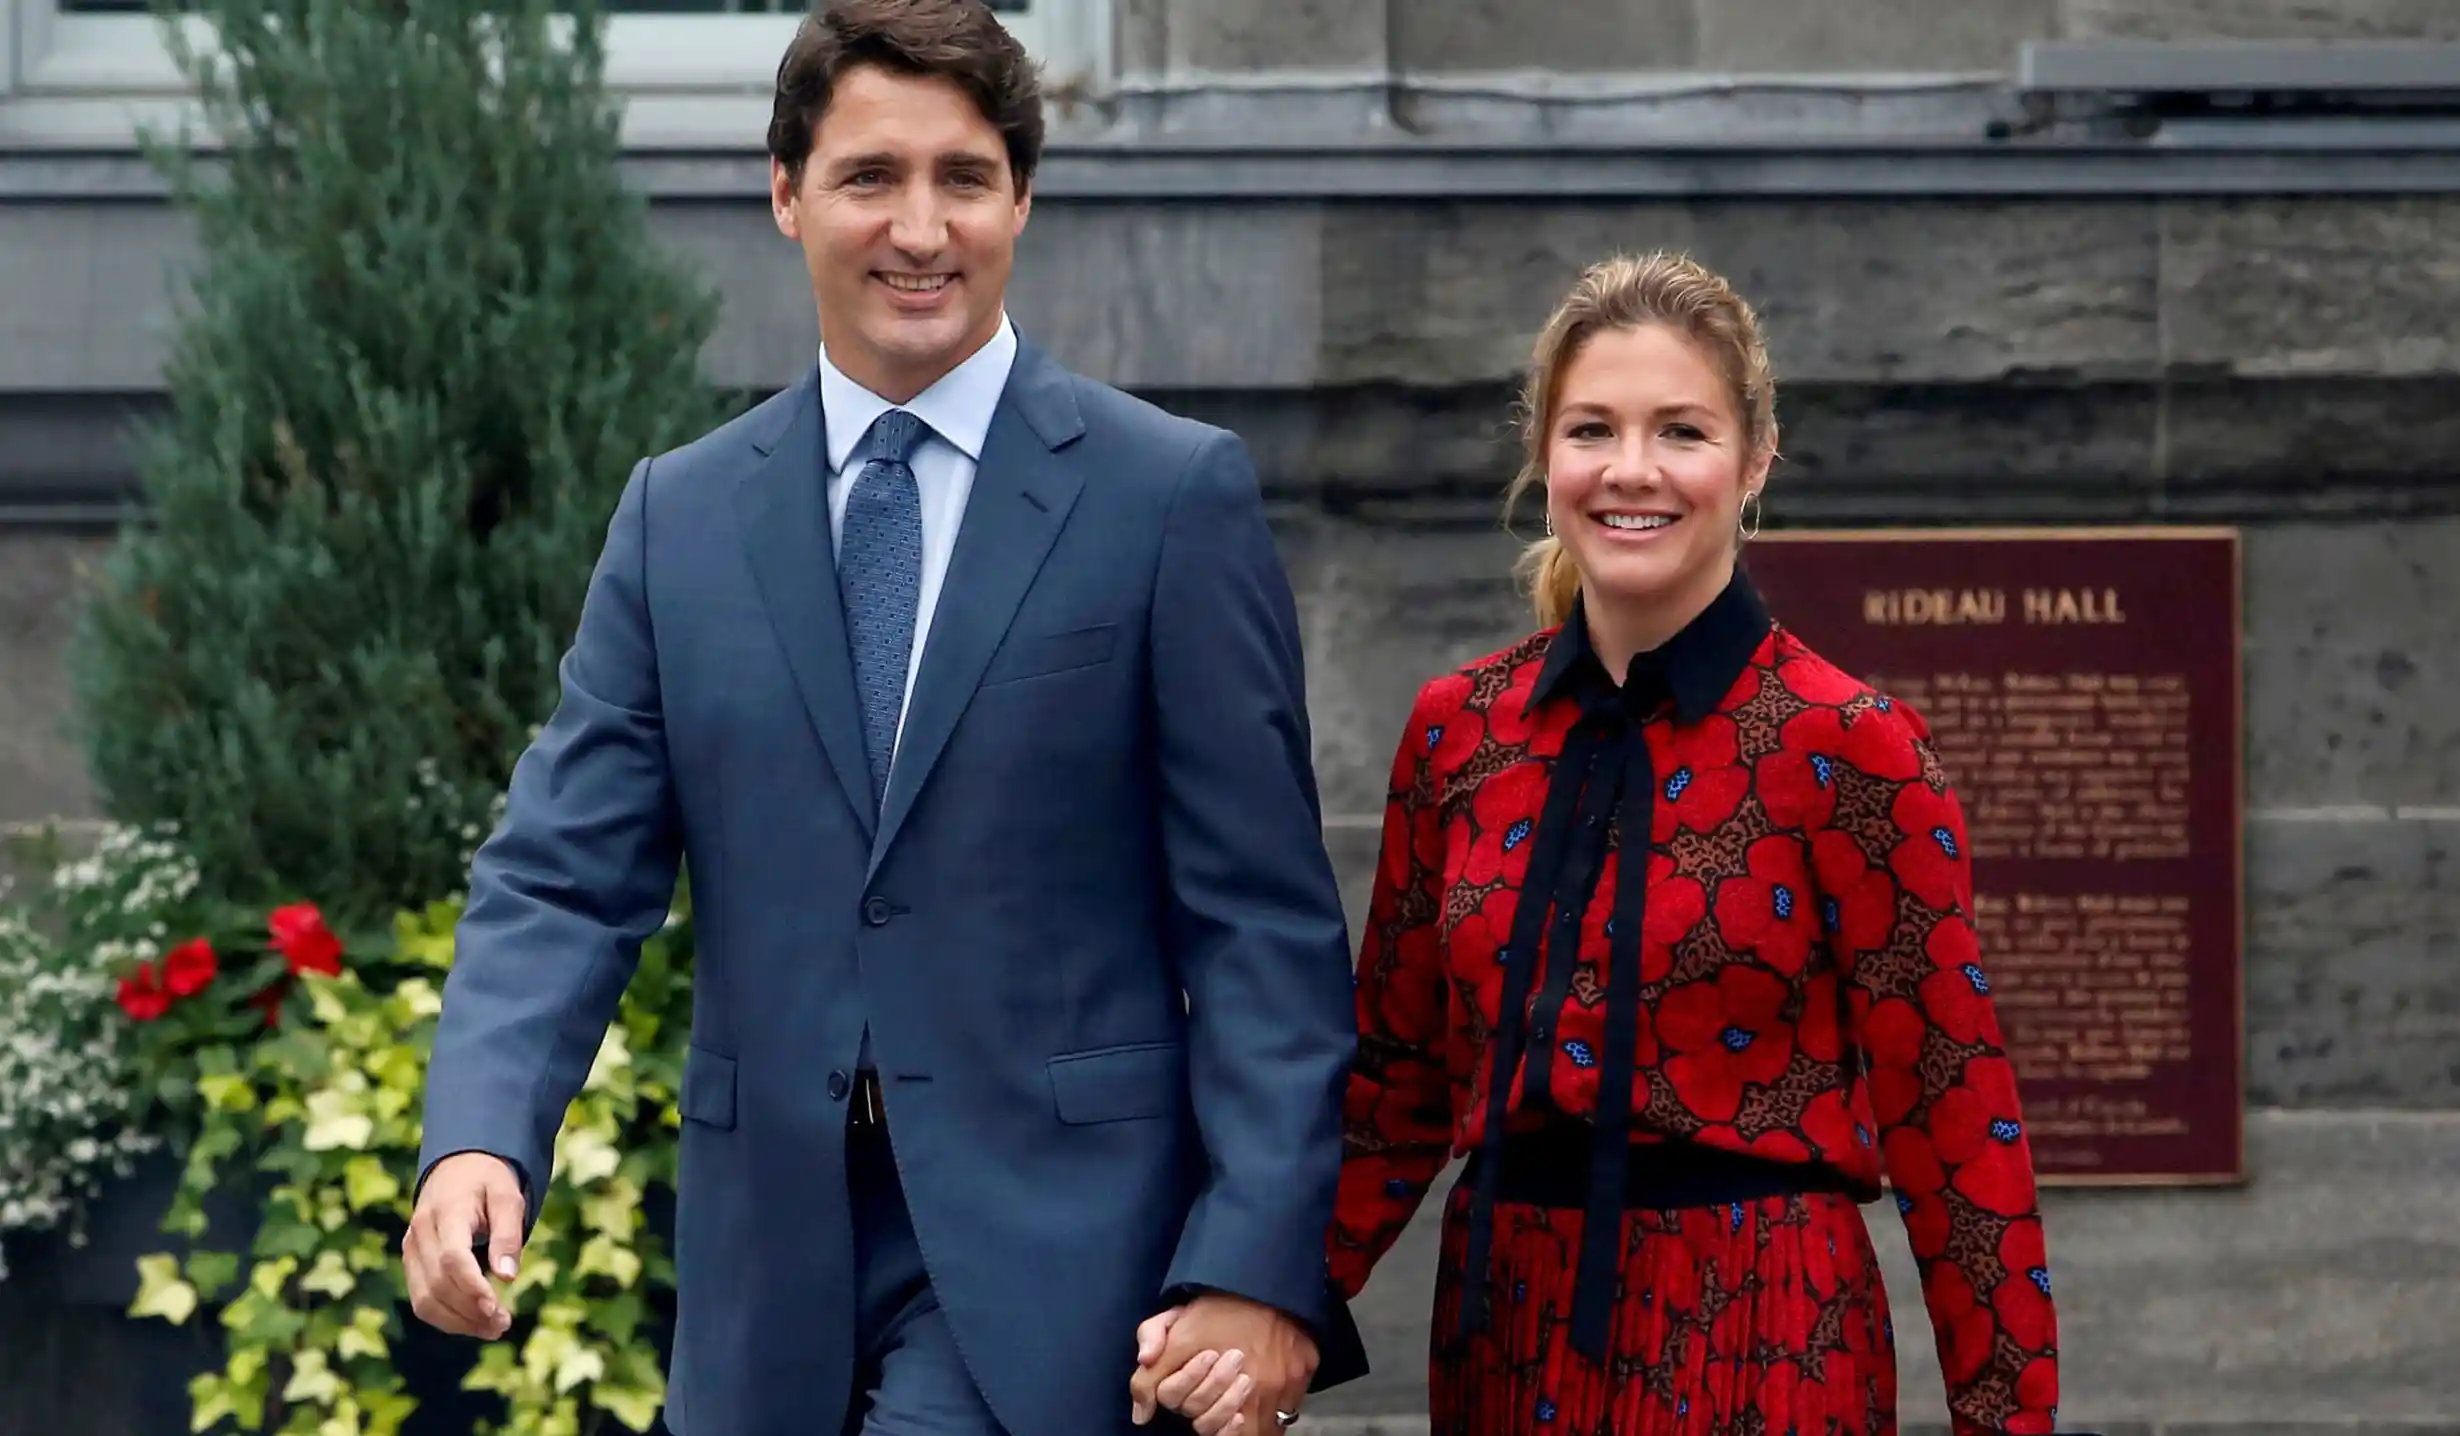 Canadian Prime Minister Justin Trudeau and First Lady Announce Their Separation